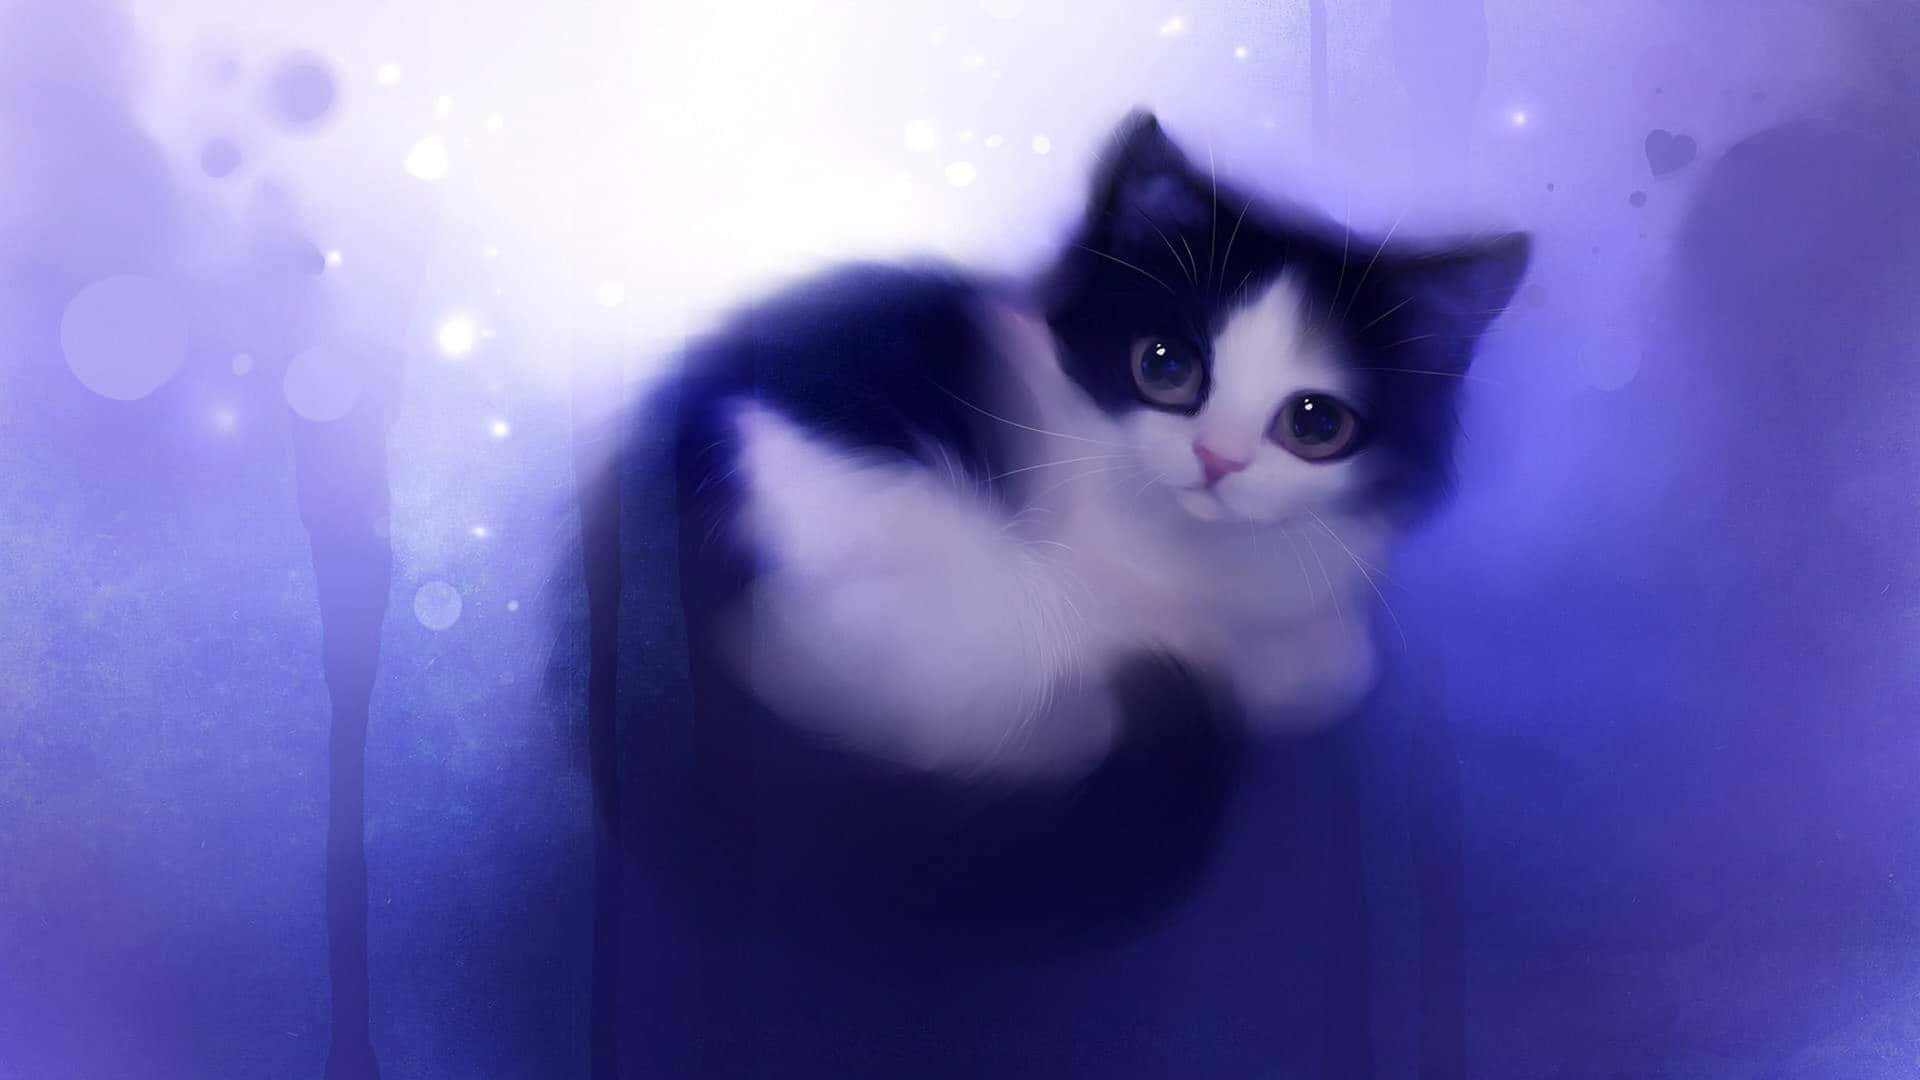 A Black And White Cat Sitting On A Purple Background